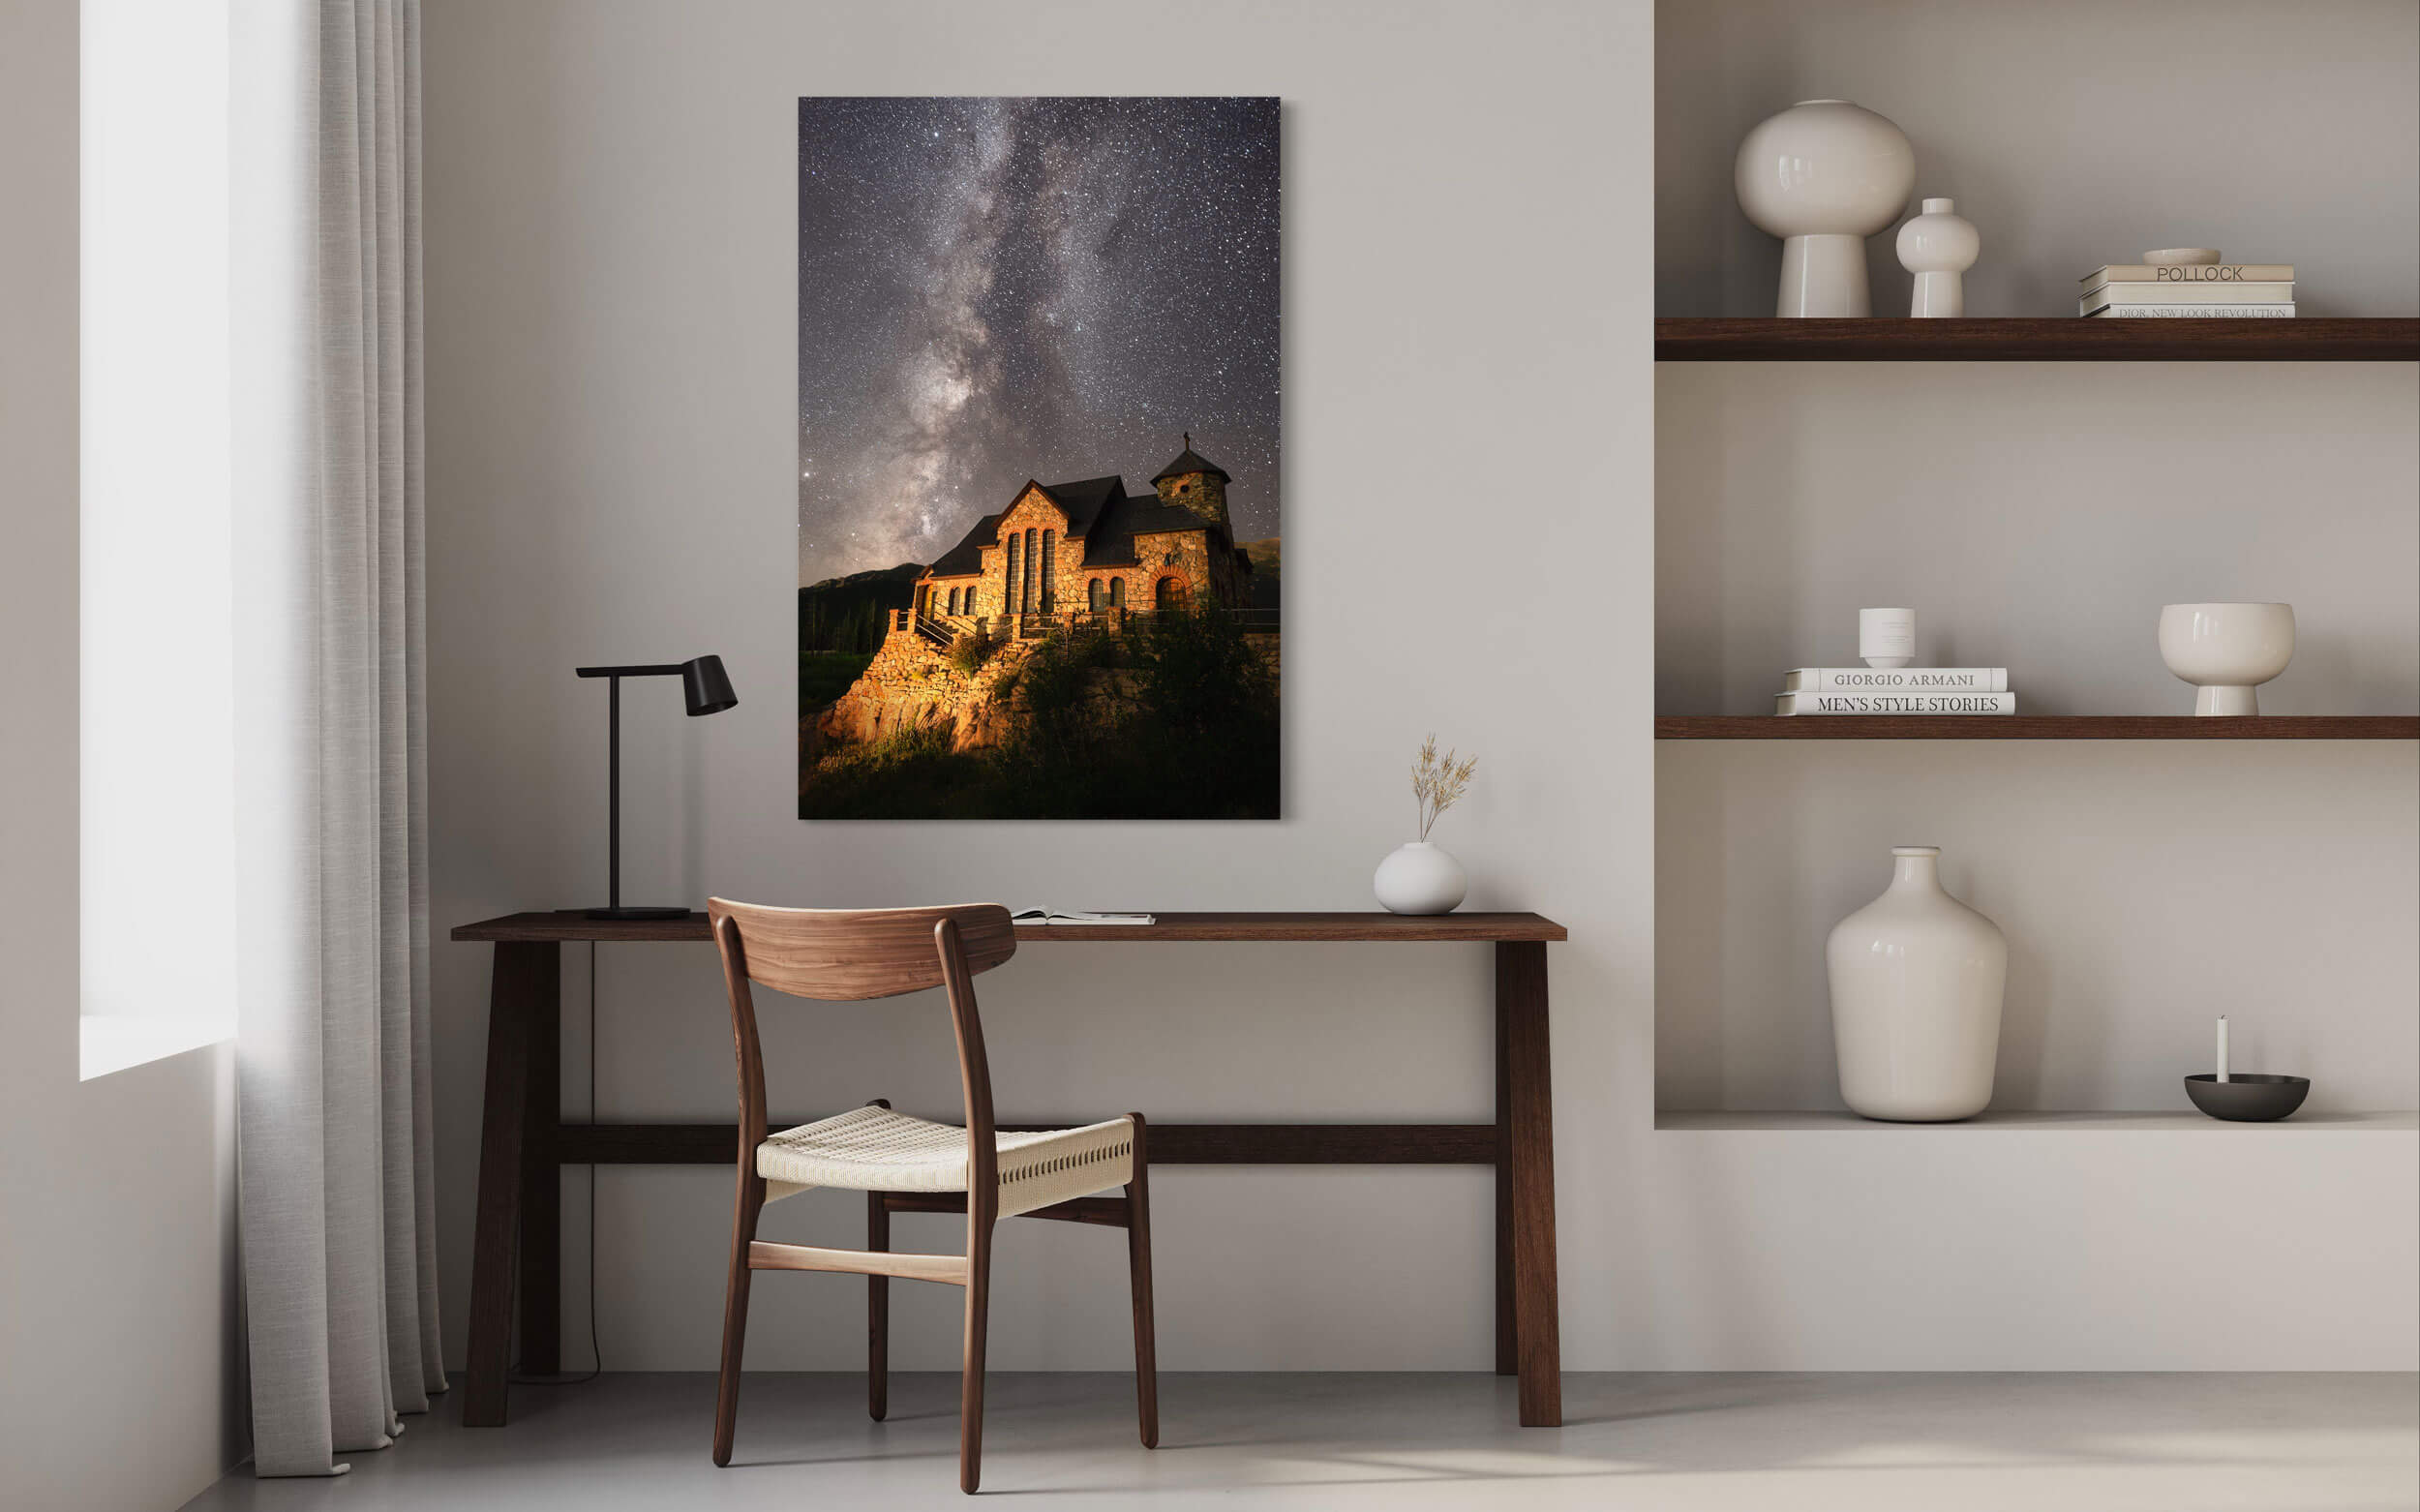 A piece of Colorado art showing the St. Malo's Chapel near Estes Park hangs in an office.